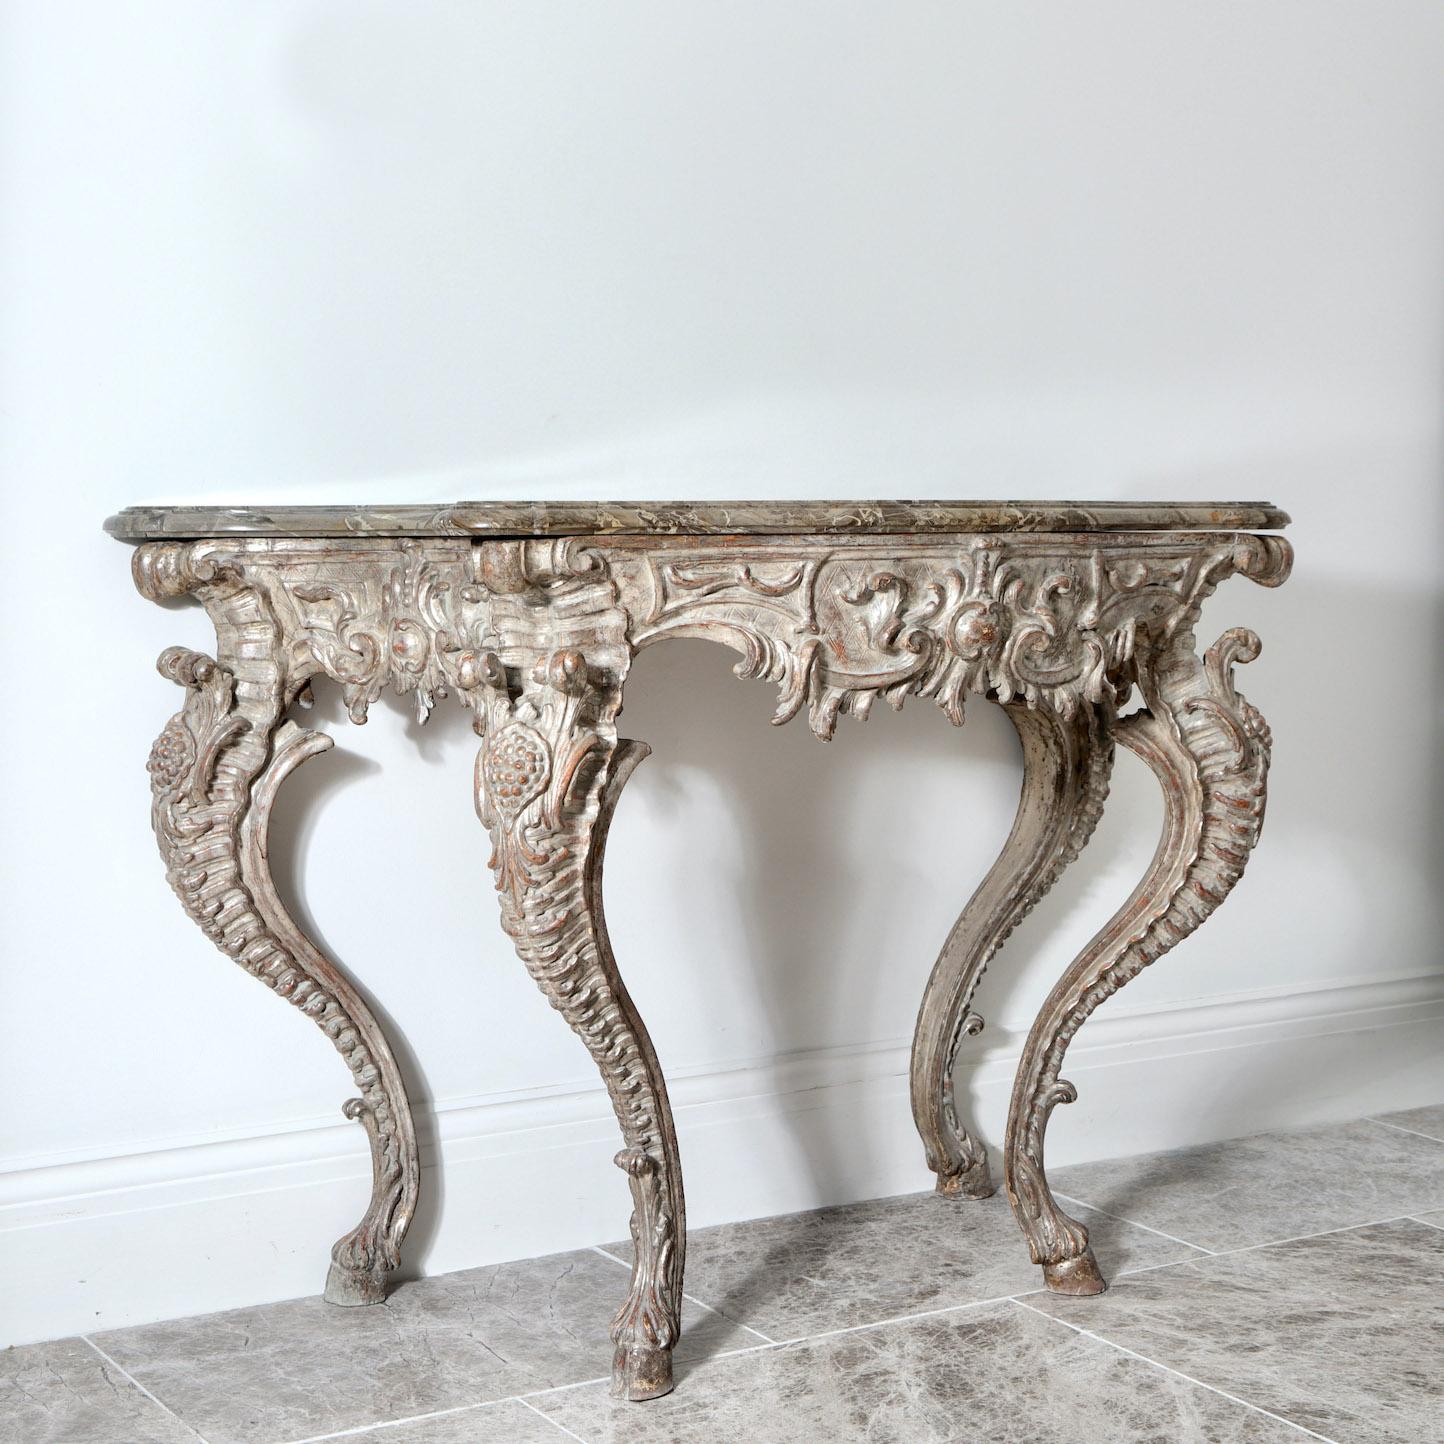 We presents an 18th century Italian console table.

Italy, Probably Naples, Circa 1790.

” A striking Italian console table with bold cabriole legs, in its original softly distressed, delicate silver leaf finish, exceptional double bevelled,